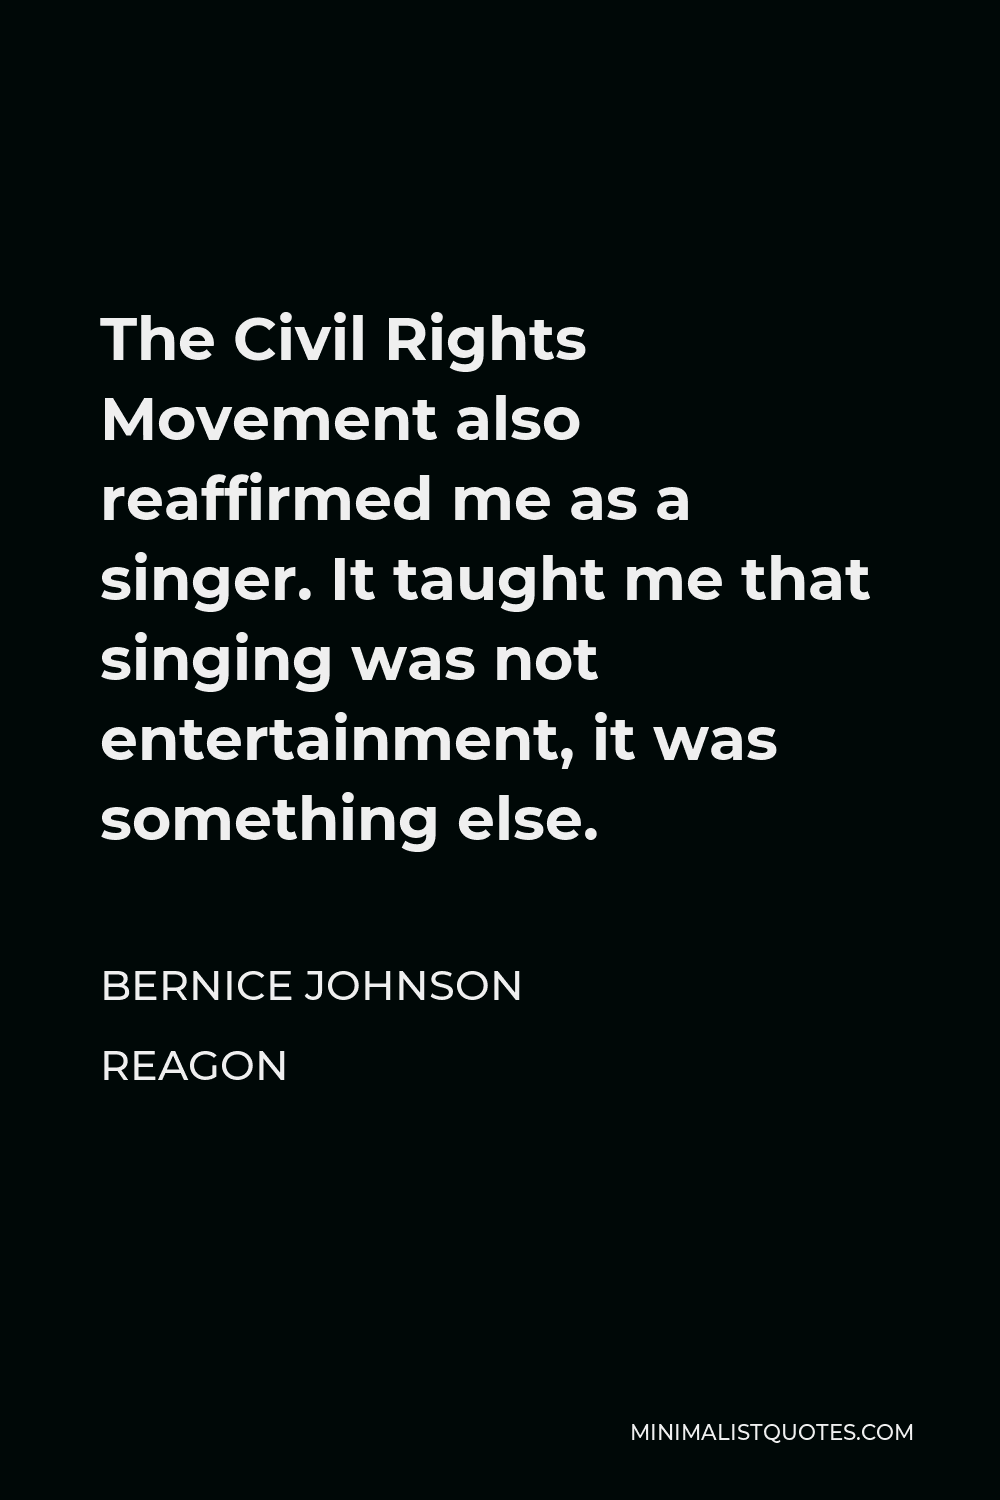 Bernice Johnson Reagon Quote - The Civil Rights Movement also reaffirmed me as a singer. It taught me that singing was not entertainment, it was something else.